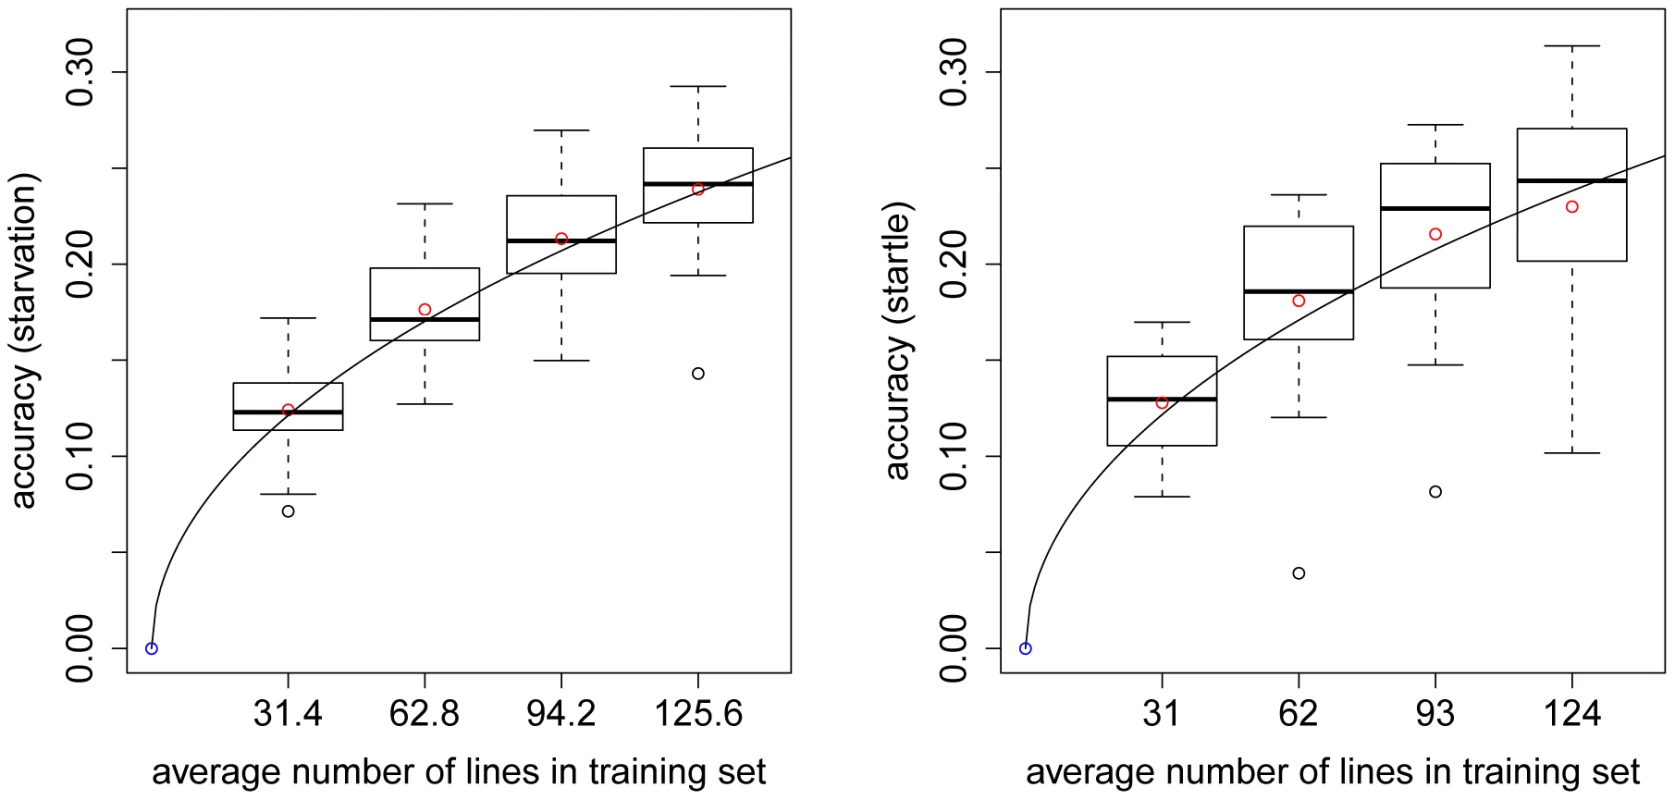 Accuracy of prediction of GBLUP for CVs with different numbers of lines in the training set.